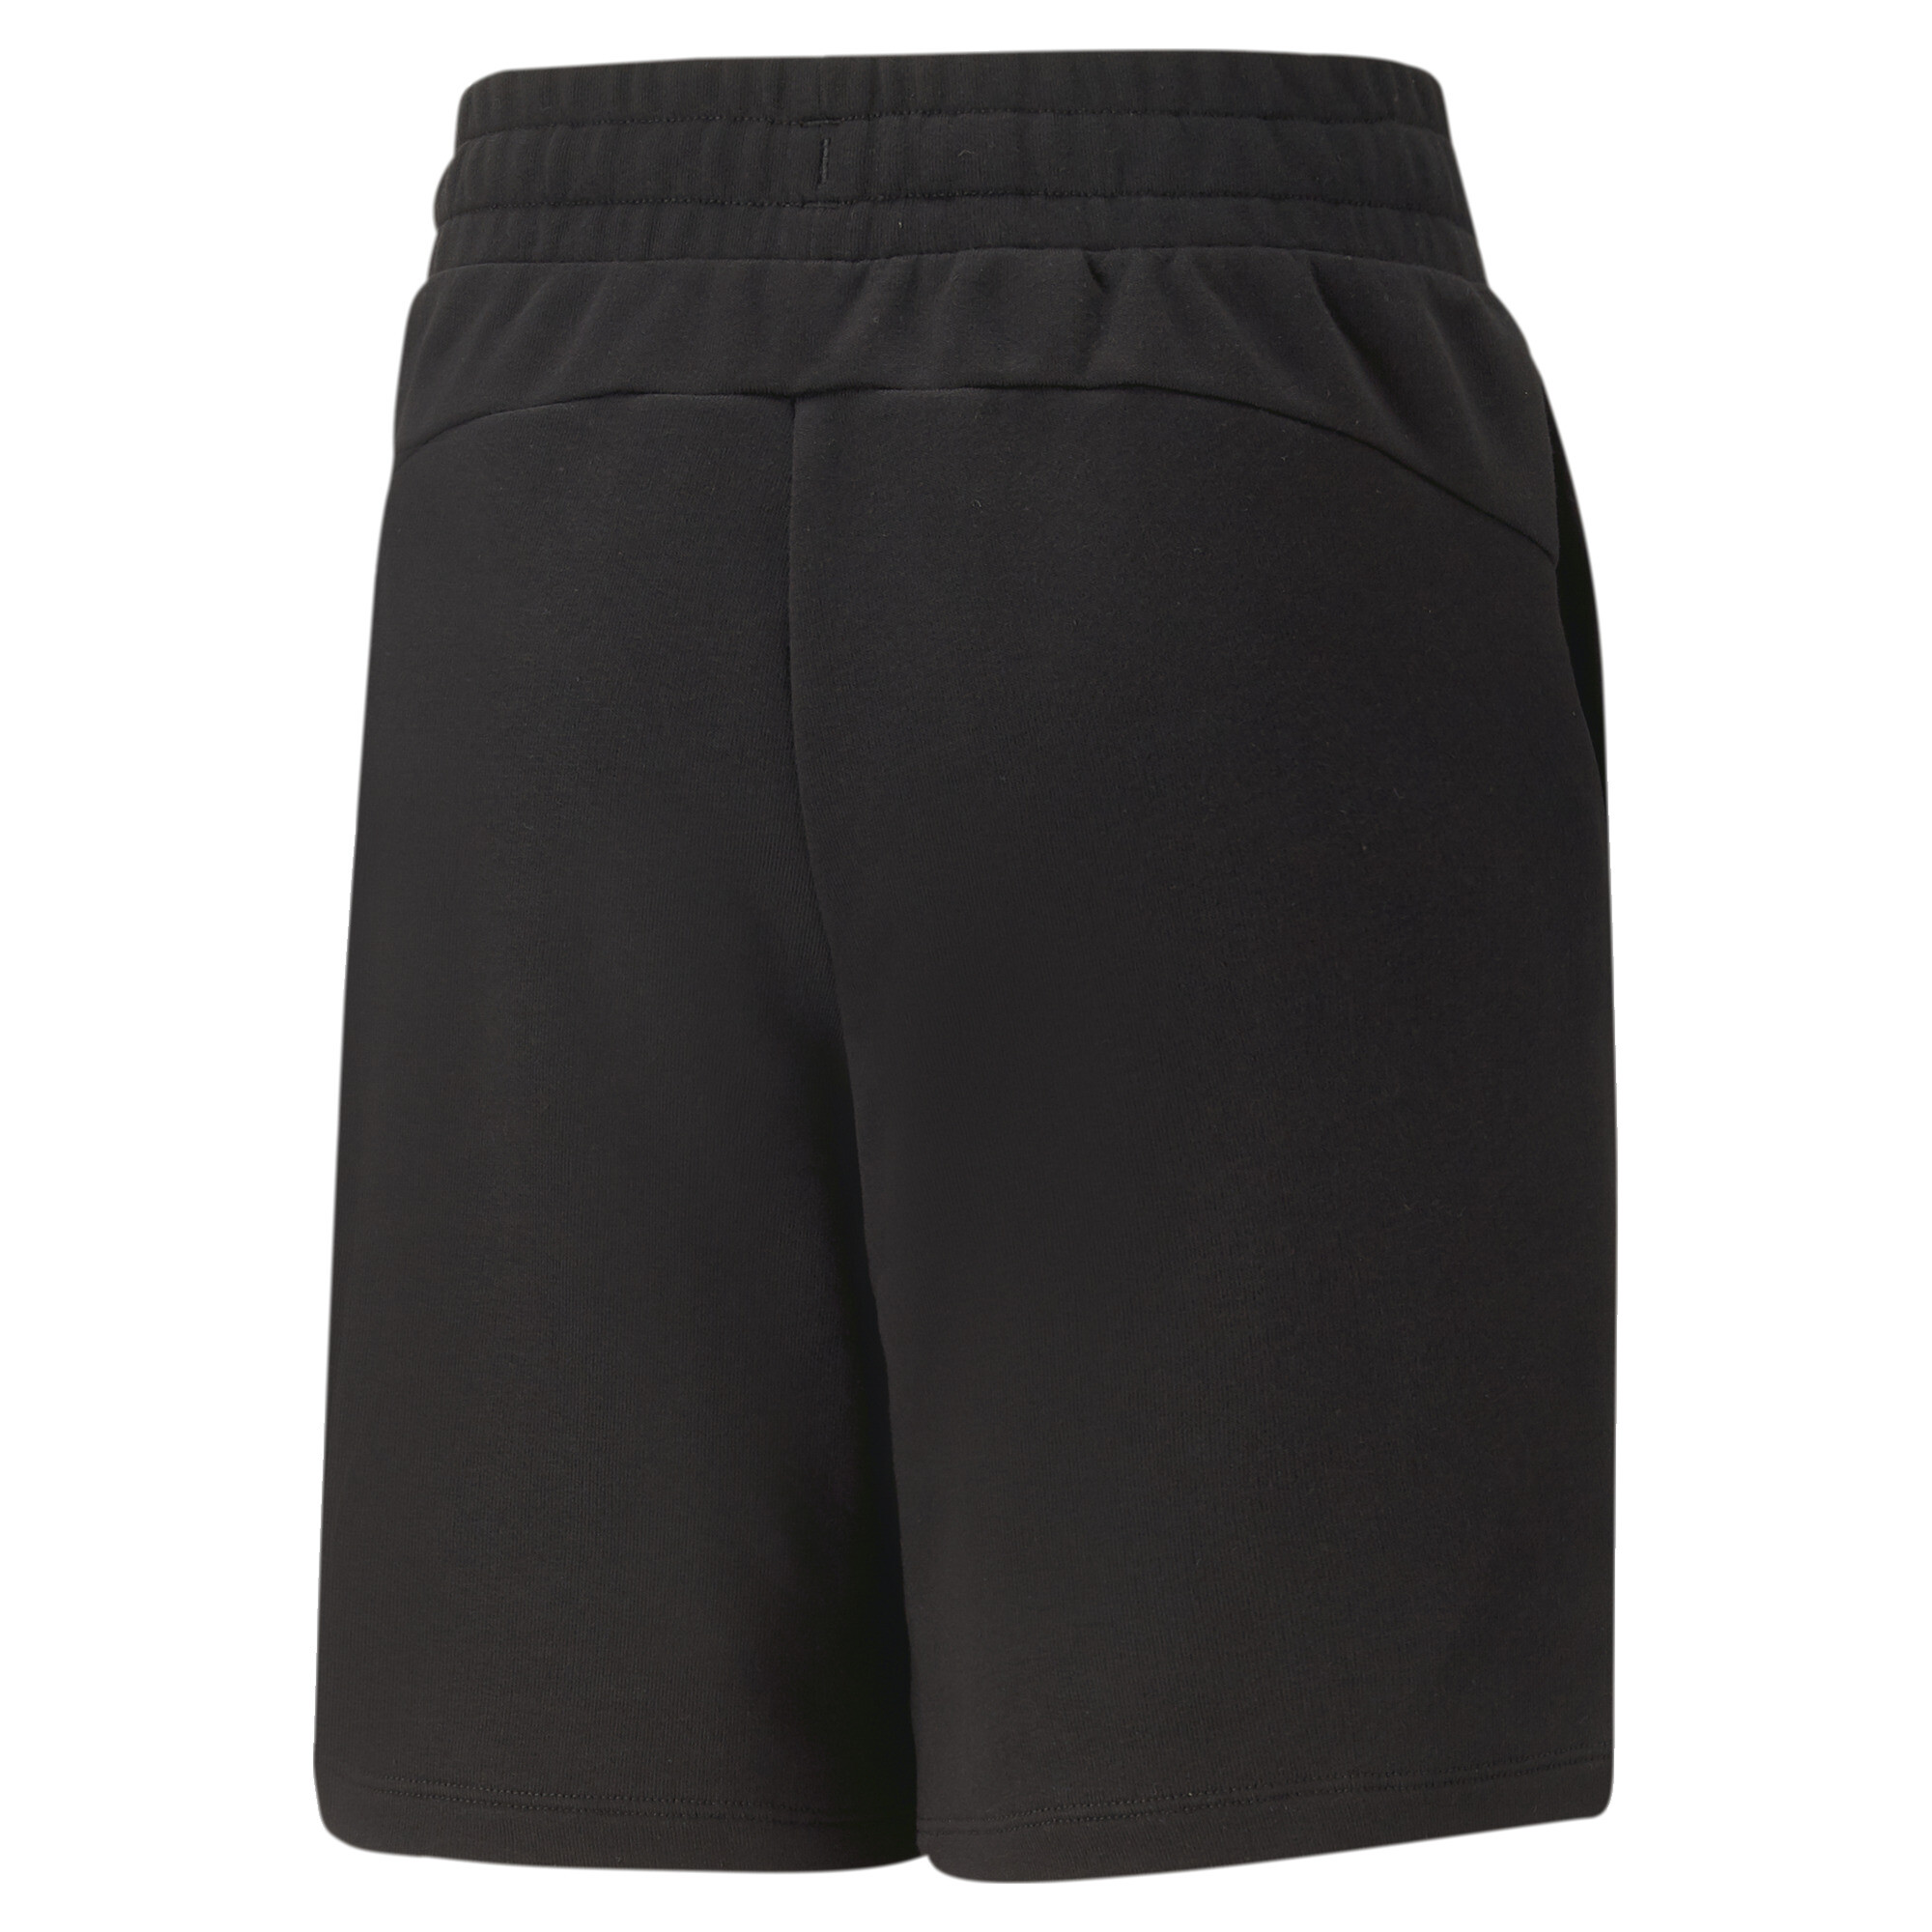 PUMA X MIRACULOUS Shorts In Black, Size 9-10 Youth